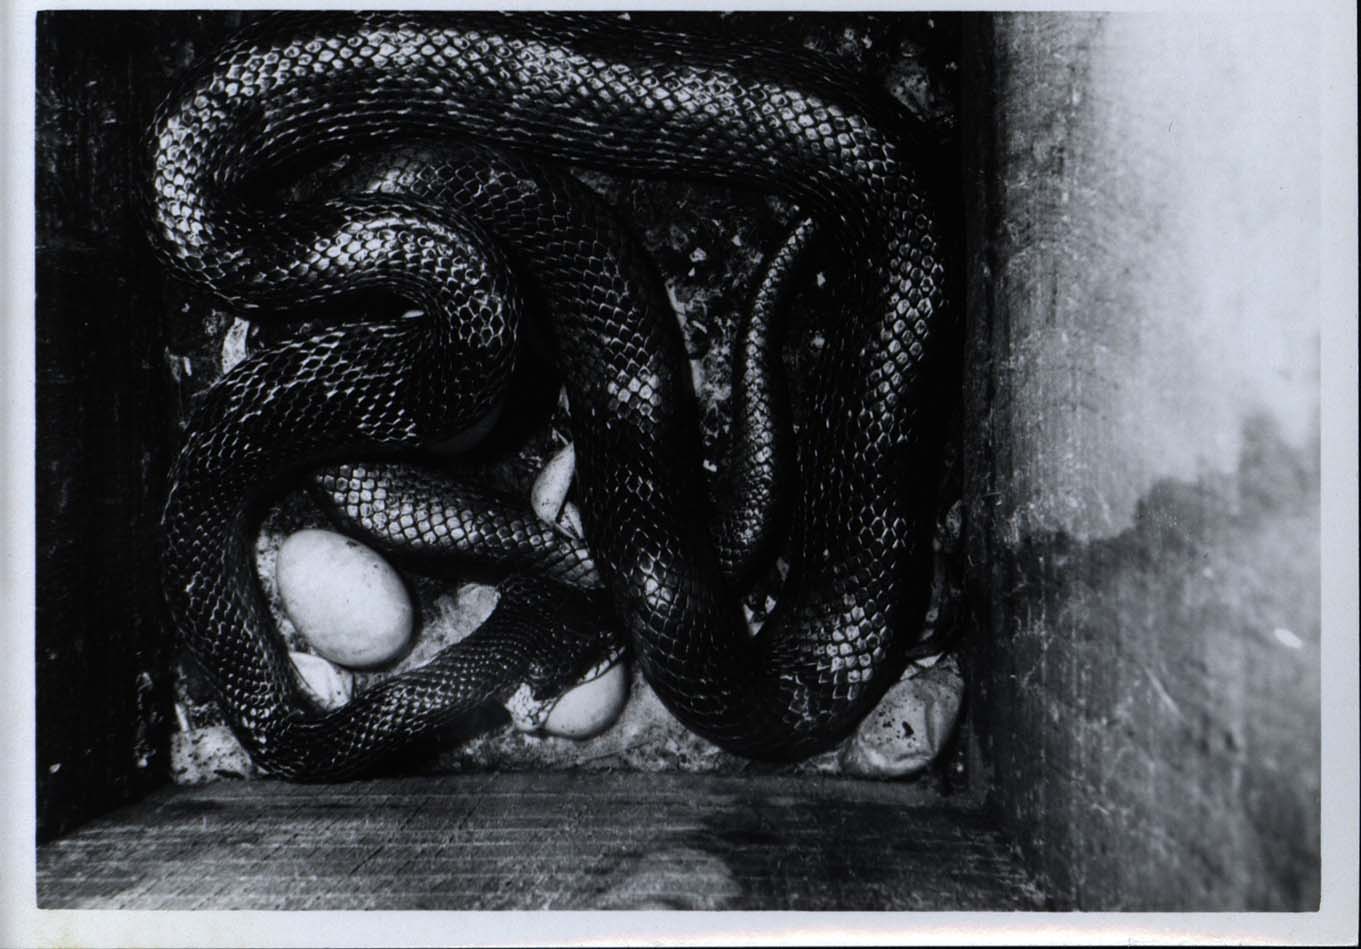 Photograph of a snake among duck eggs in a Wood Duck house